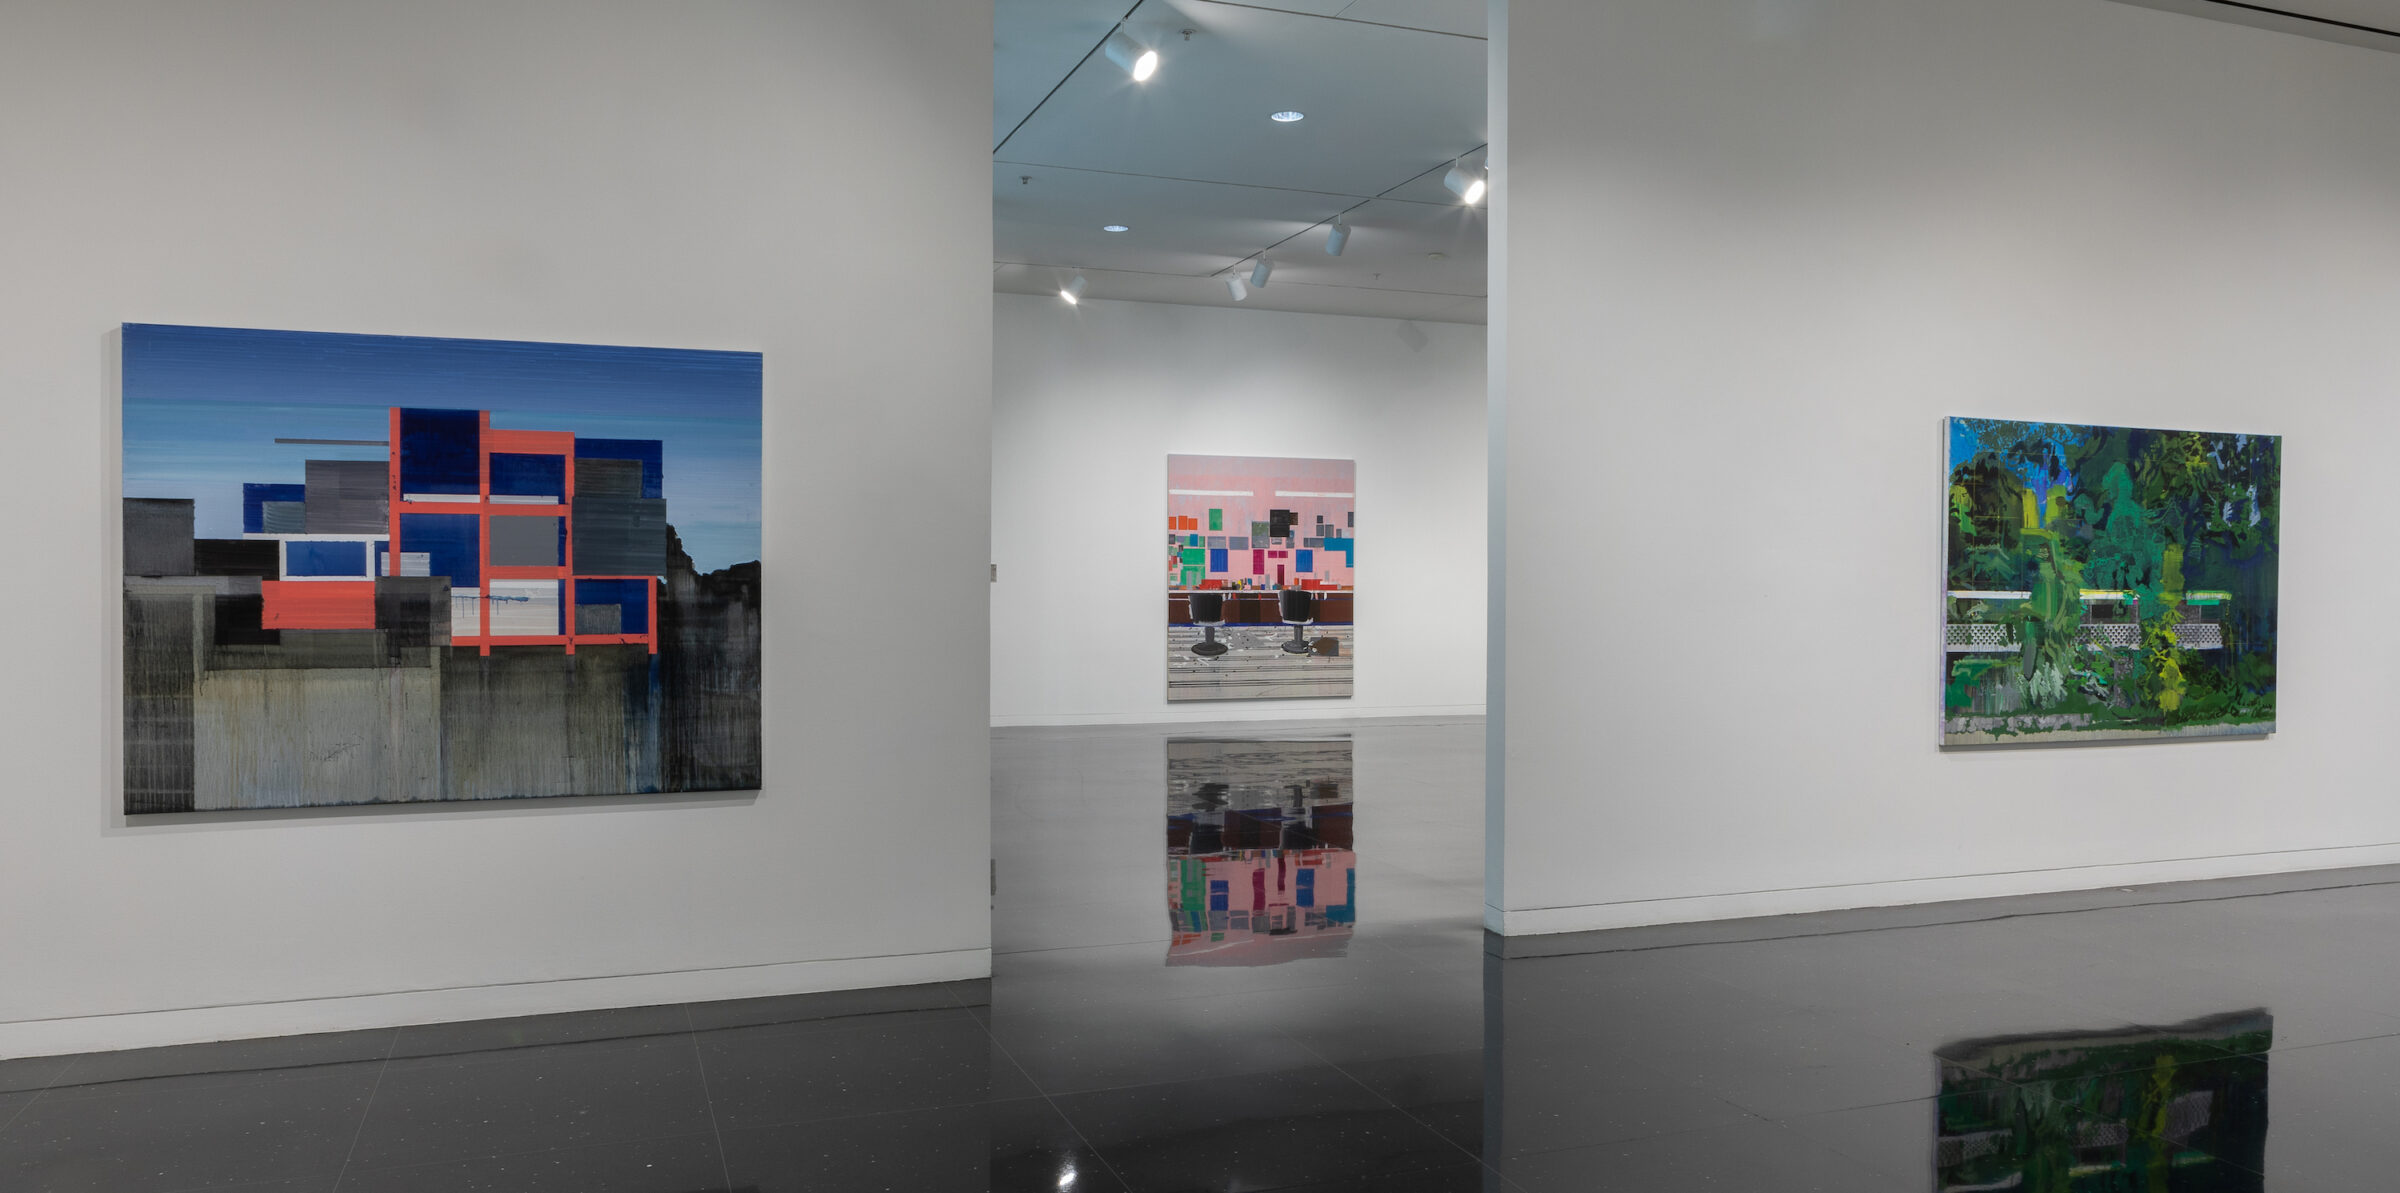 Two white gallery walls on which two large unframed landscape paintings hang. In the middle of the walls and through an opening, a third unframed painting of two barbershop chairs with an abstract geometric background is visible.